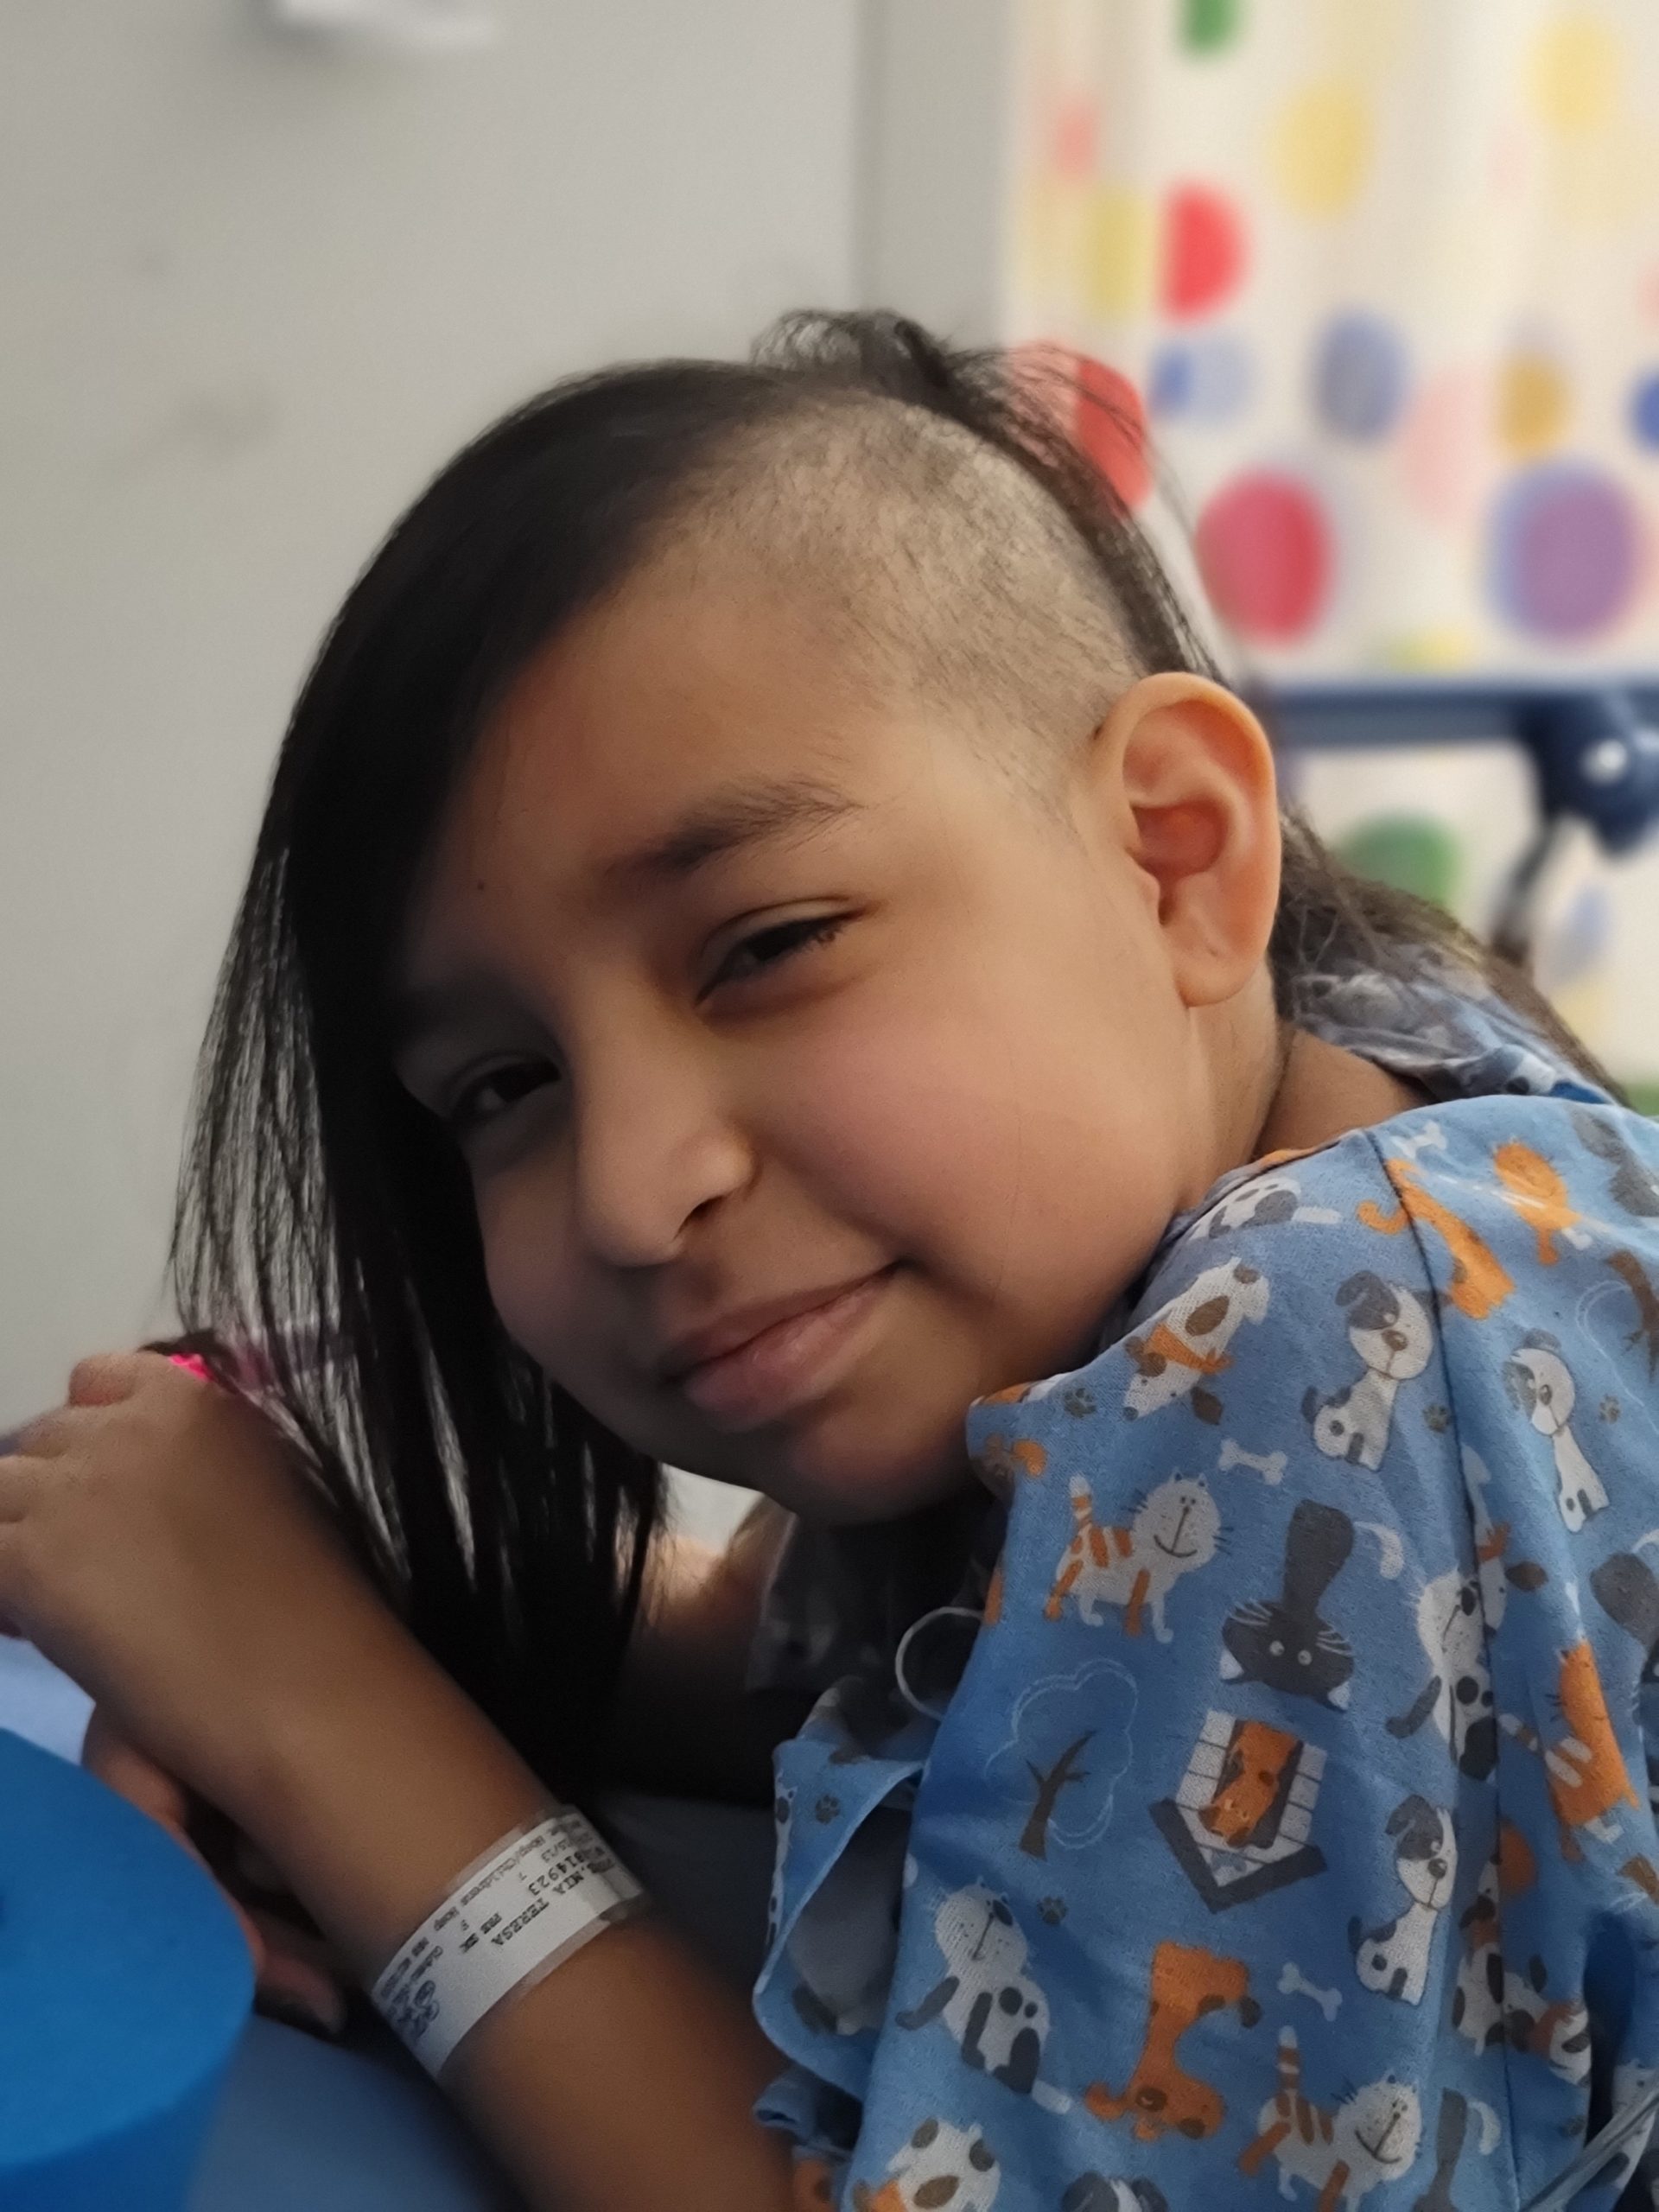 Leukemia patients like Mia depend on blood donors